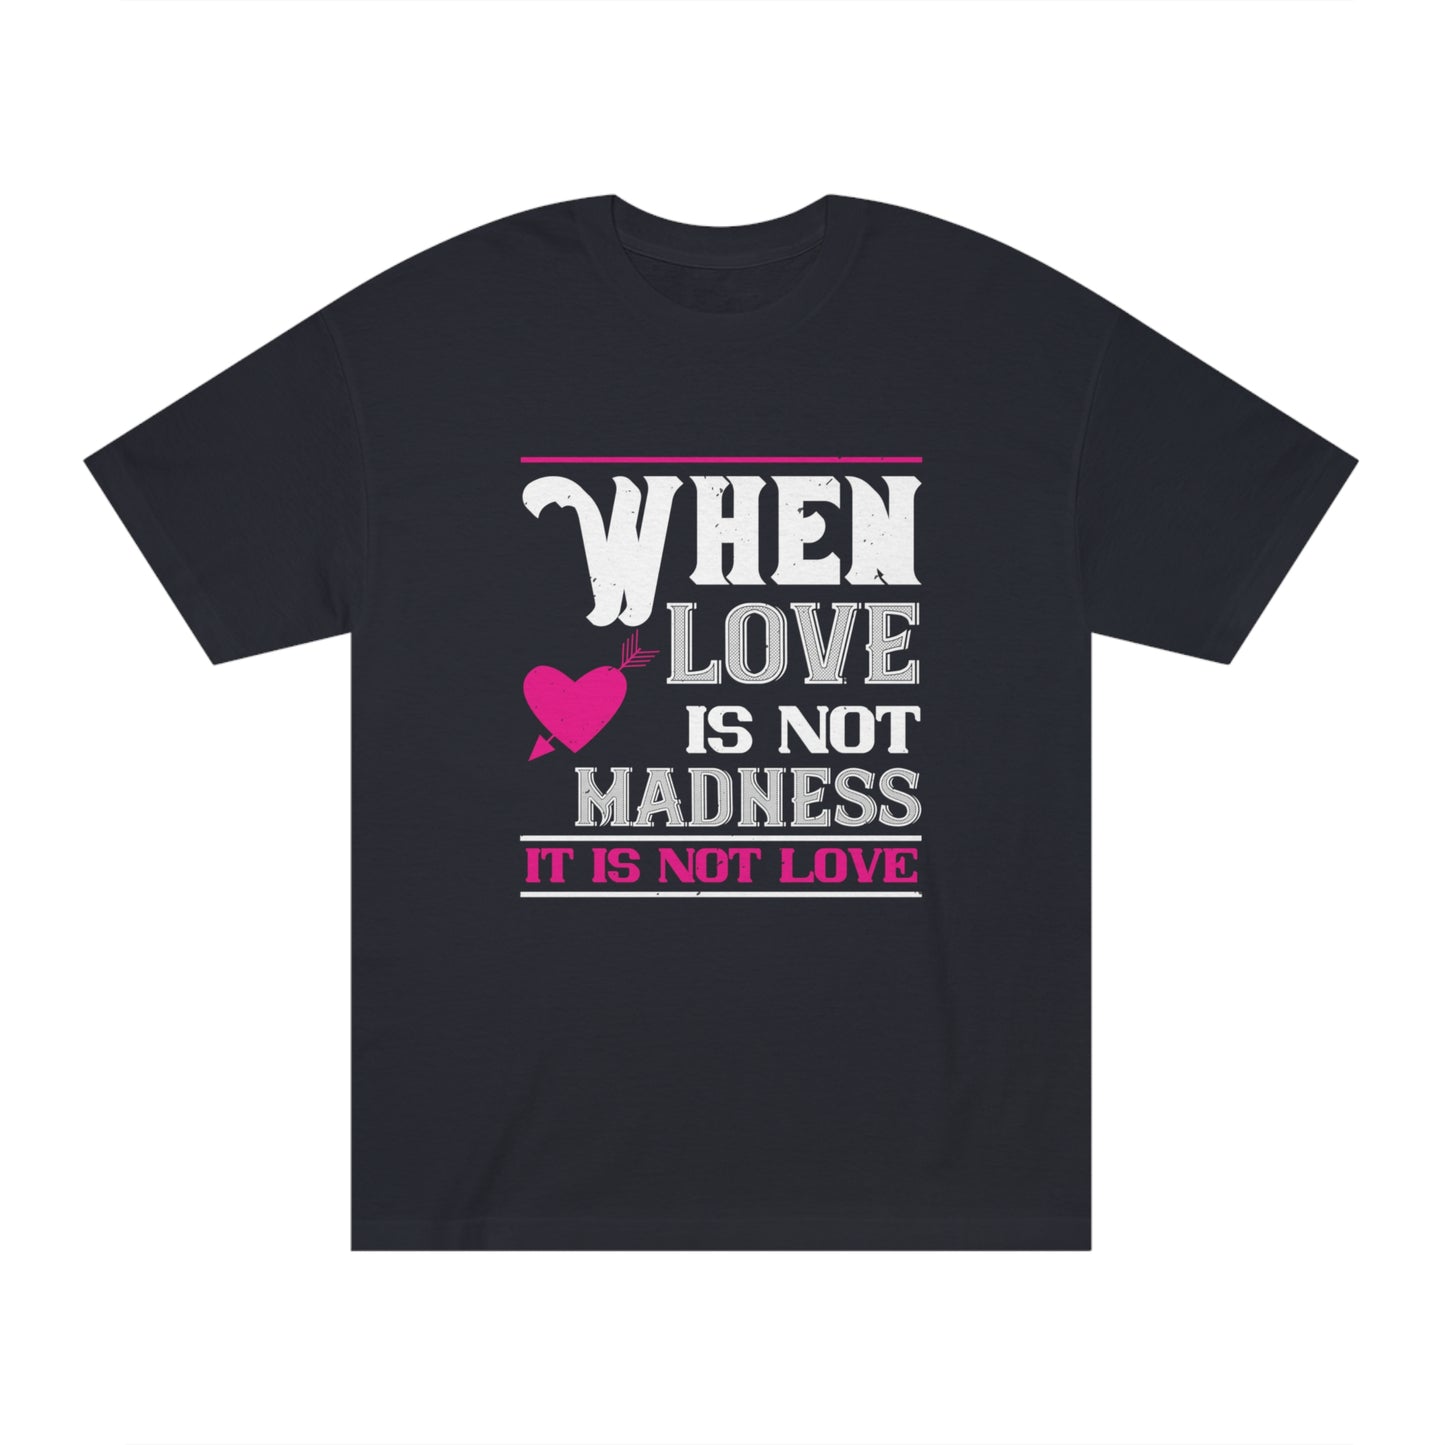 When love is not madness its not love Unisex Classic Tee